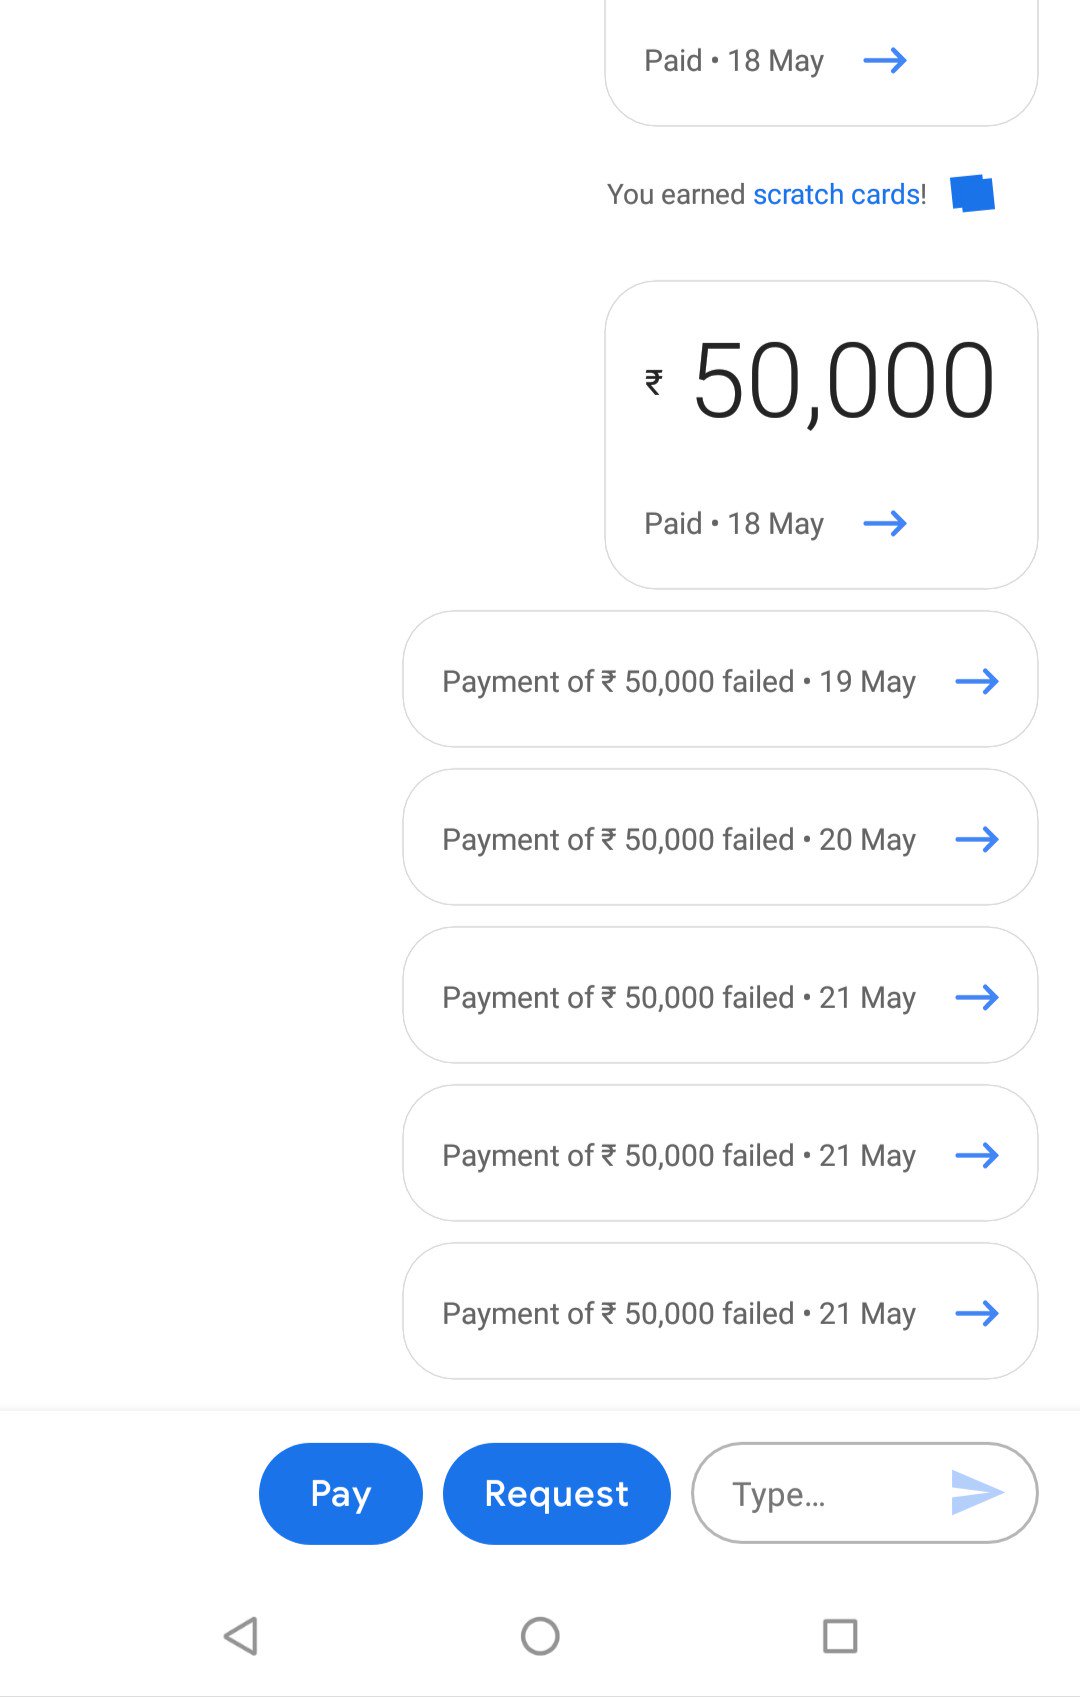 Can I send 50k in Google Pay?